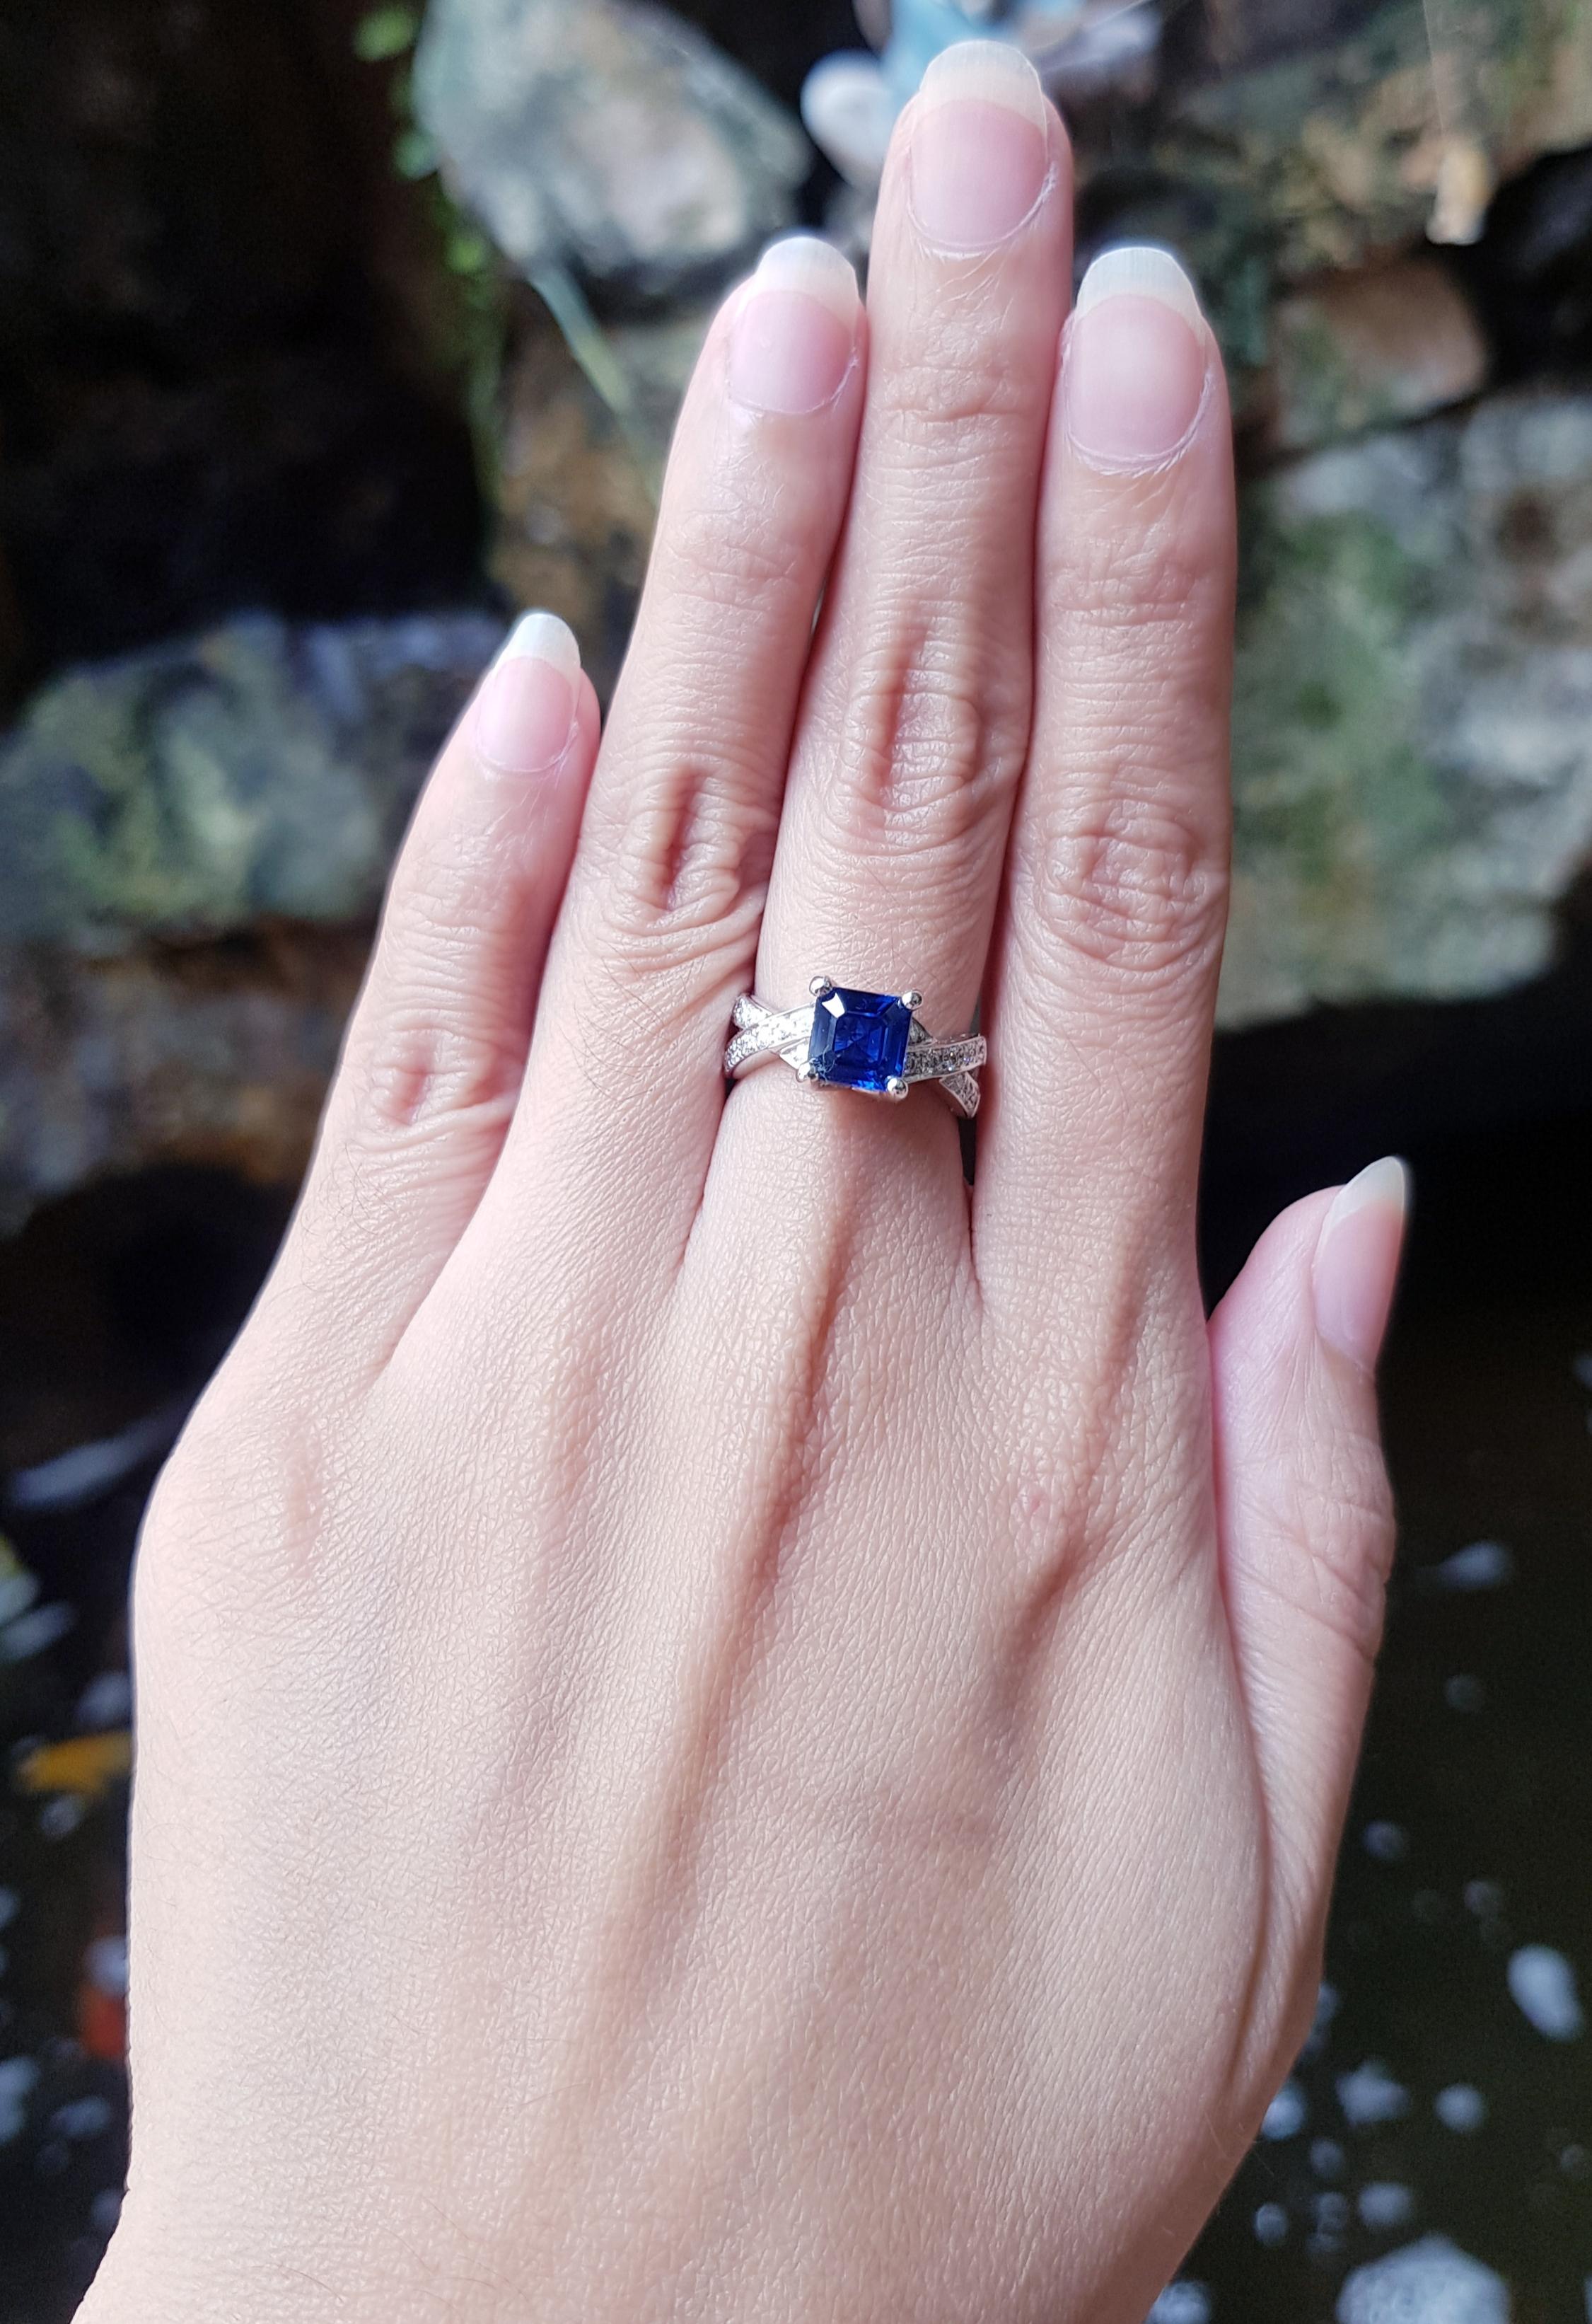 Blue Sapphire 1.42 carats with Diamond 0.27 carat Ring set in Platinum 950 Settings
(GIT Certified, The Gem and Jewelry Institute of Thailand)

Width:  0.7 cm 
Length: 0. cm
Ring Size: 47
Total Weight: 7.13 grams


